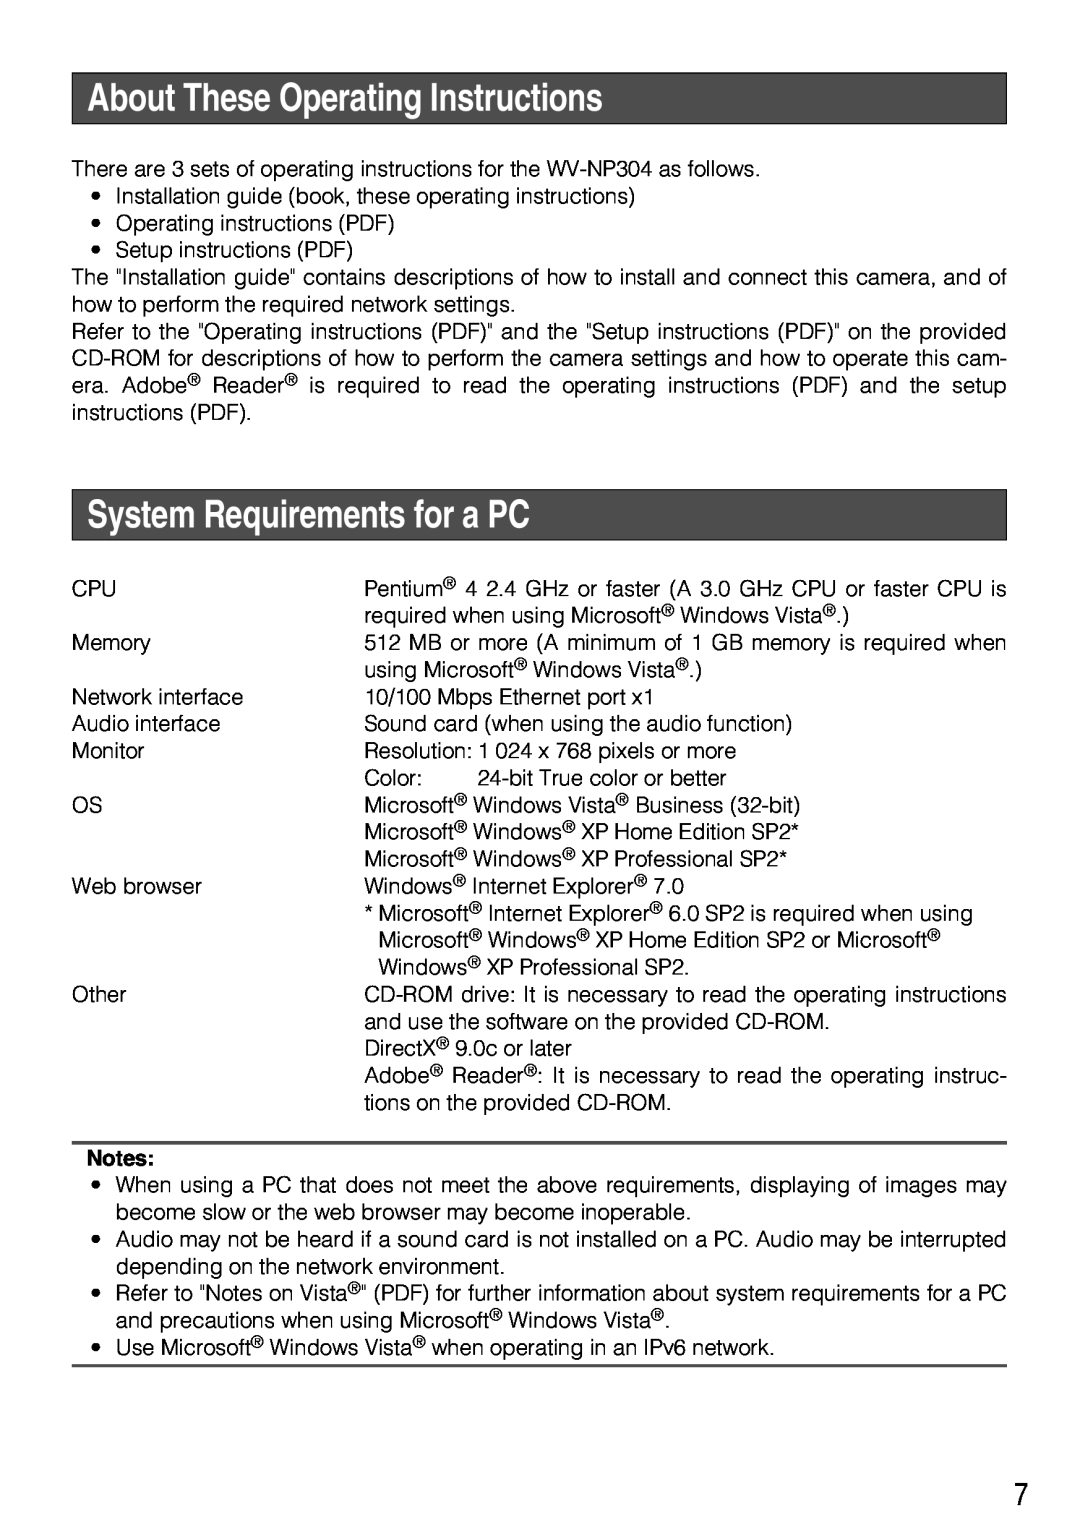 Panasonic WV-NP304 manual About These Operating Instructions, System Requirements for a PC 